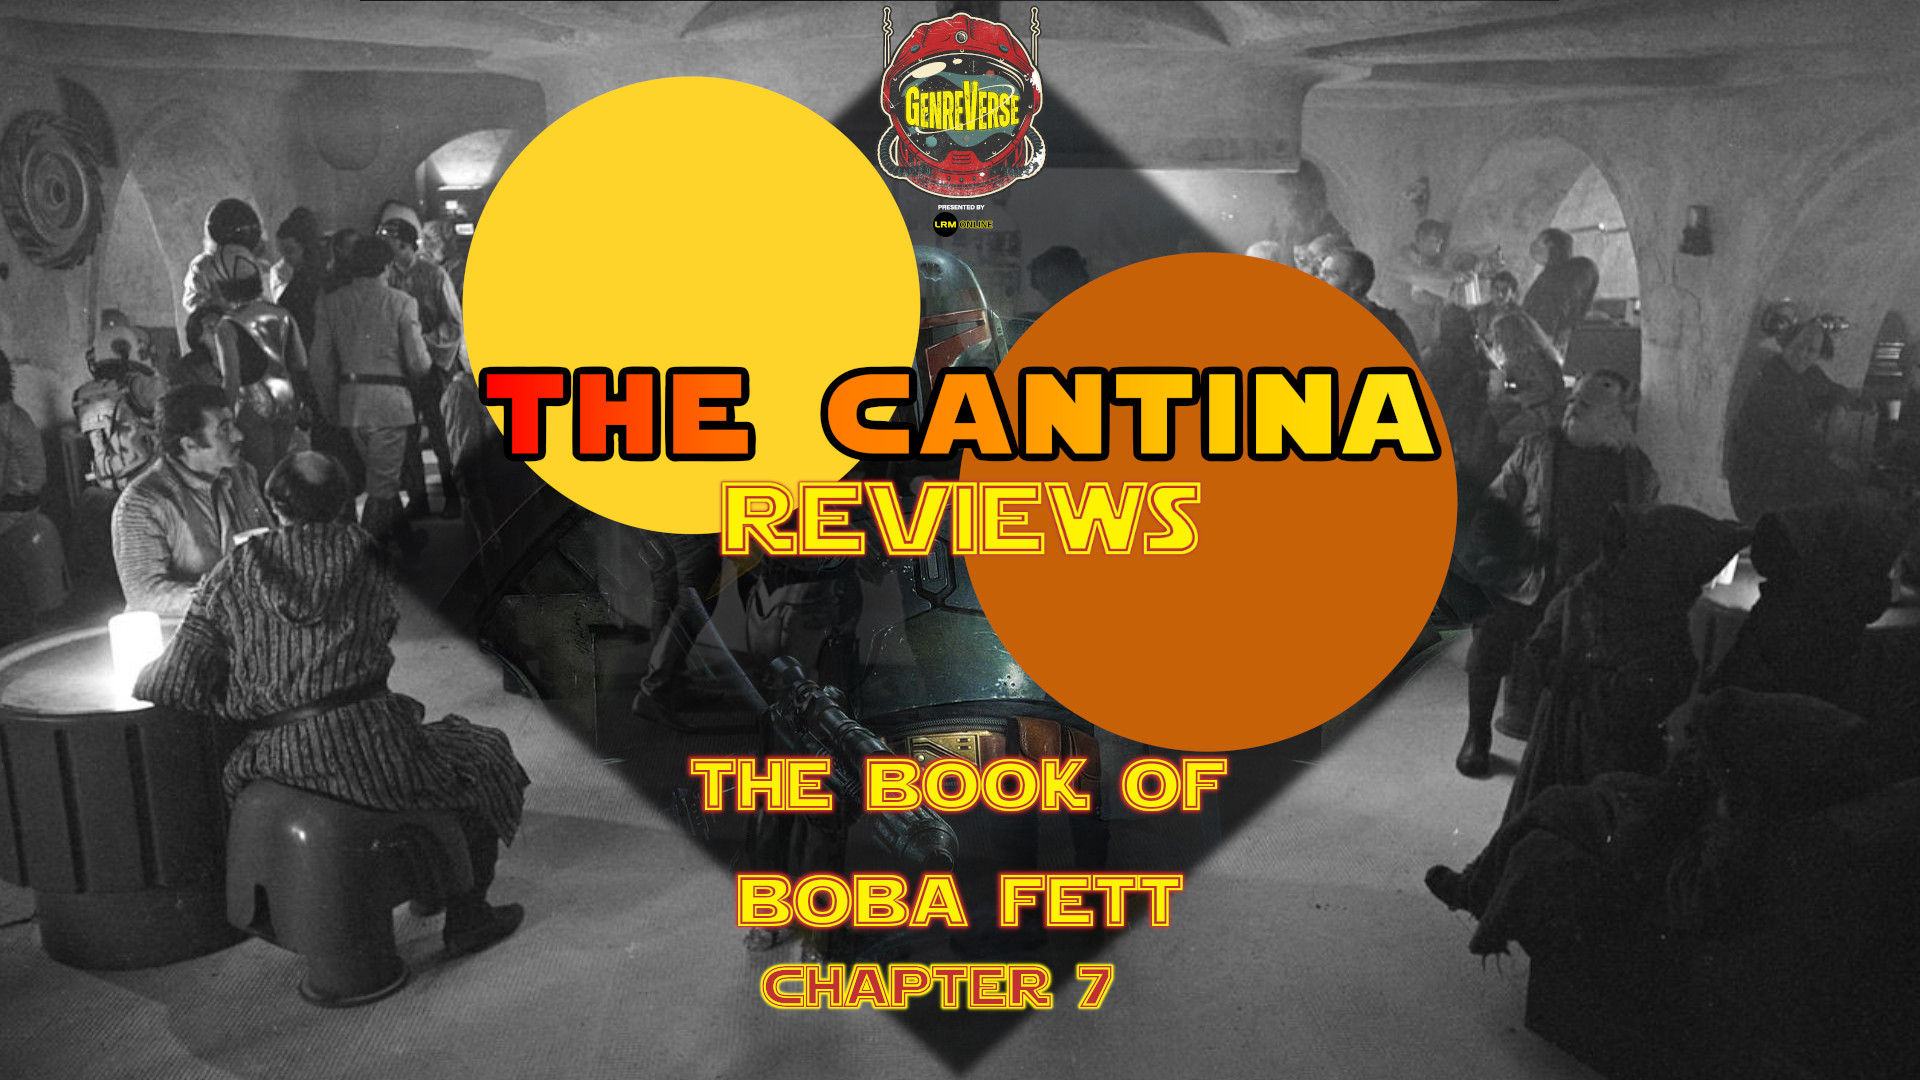 The Book Of Boba Fett Chapter 7 Review- A Shell Of A Finale With Some Cool Moments & Star Wars News The Cantina Reviews